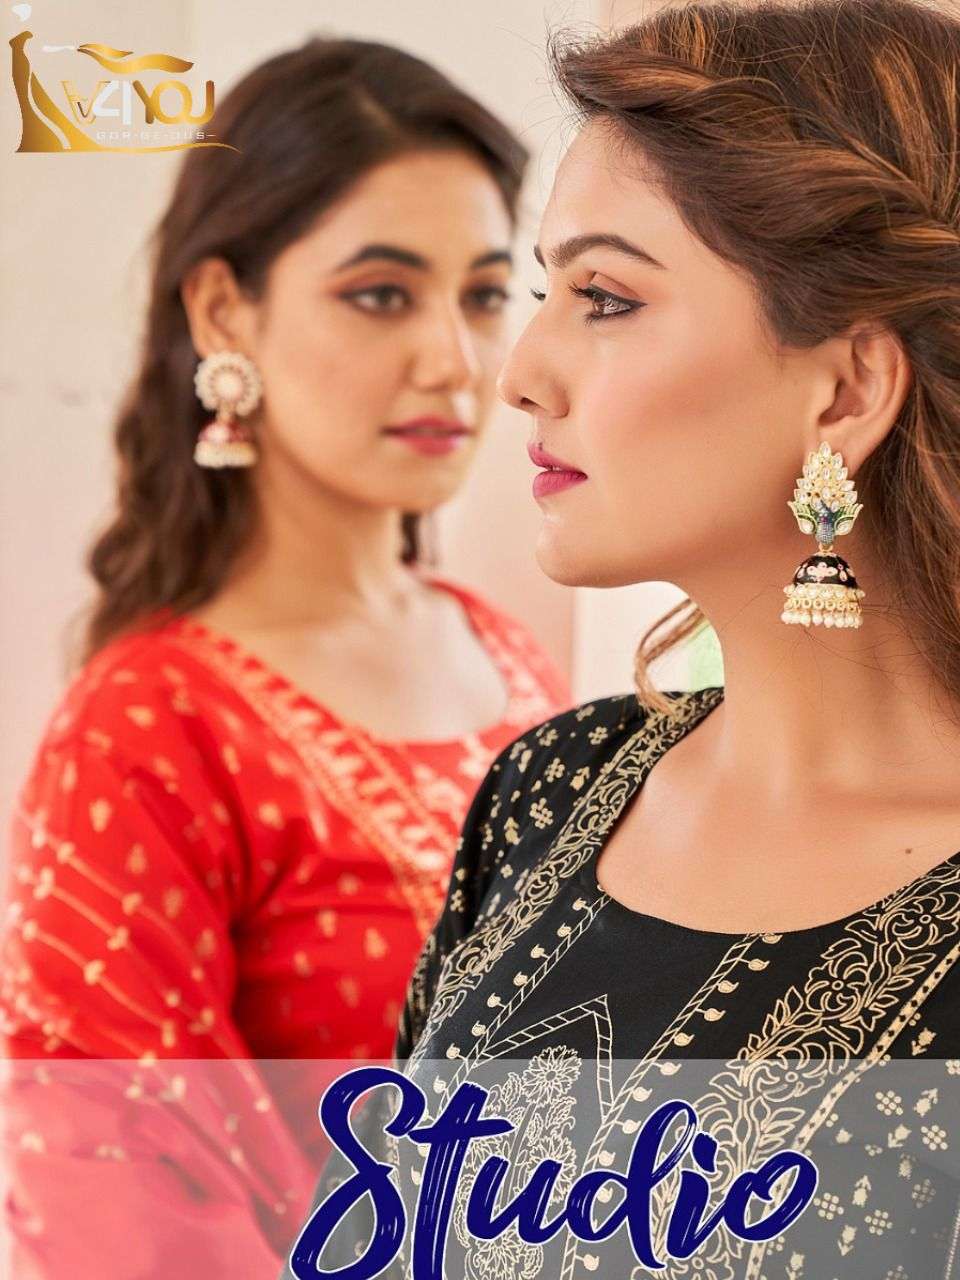 Studio By V4You 101 To 108 Series Beautiful Stylish Fancy Colorful Casual Wear & Ethnic Wear Rayon Print Gowns With Dupatta At Wholesale Price